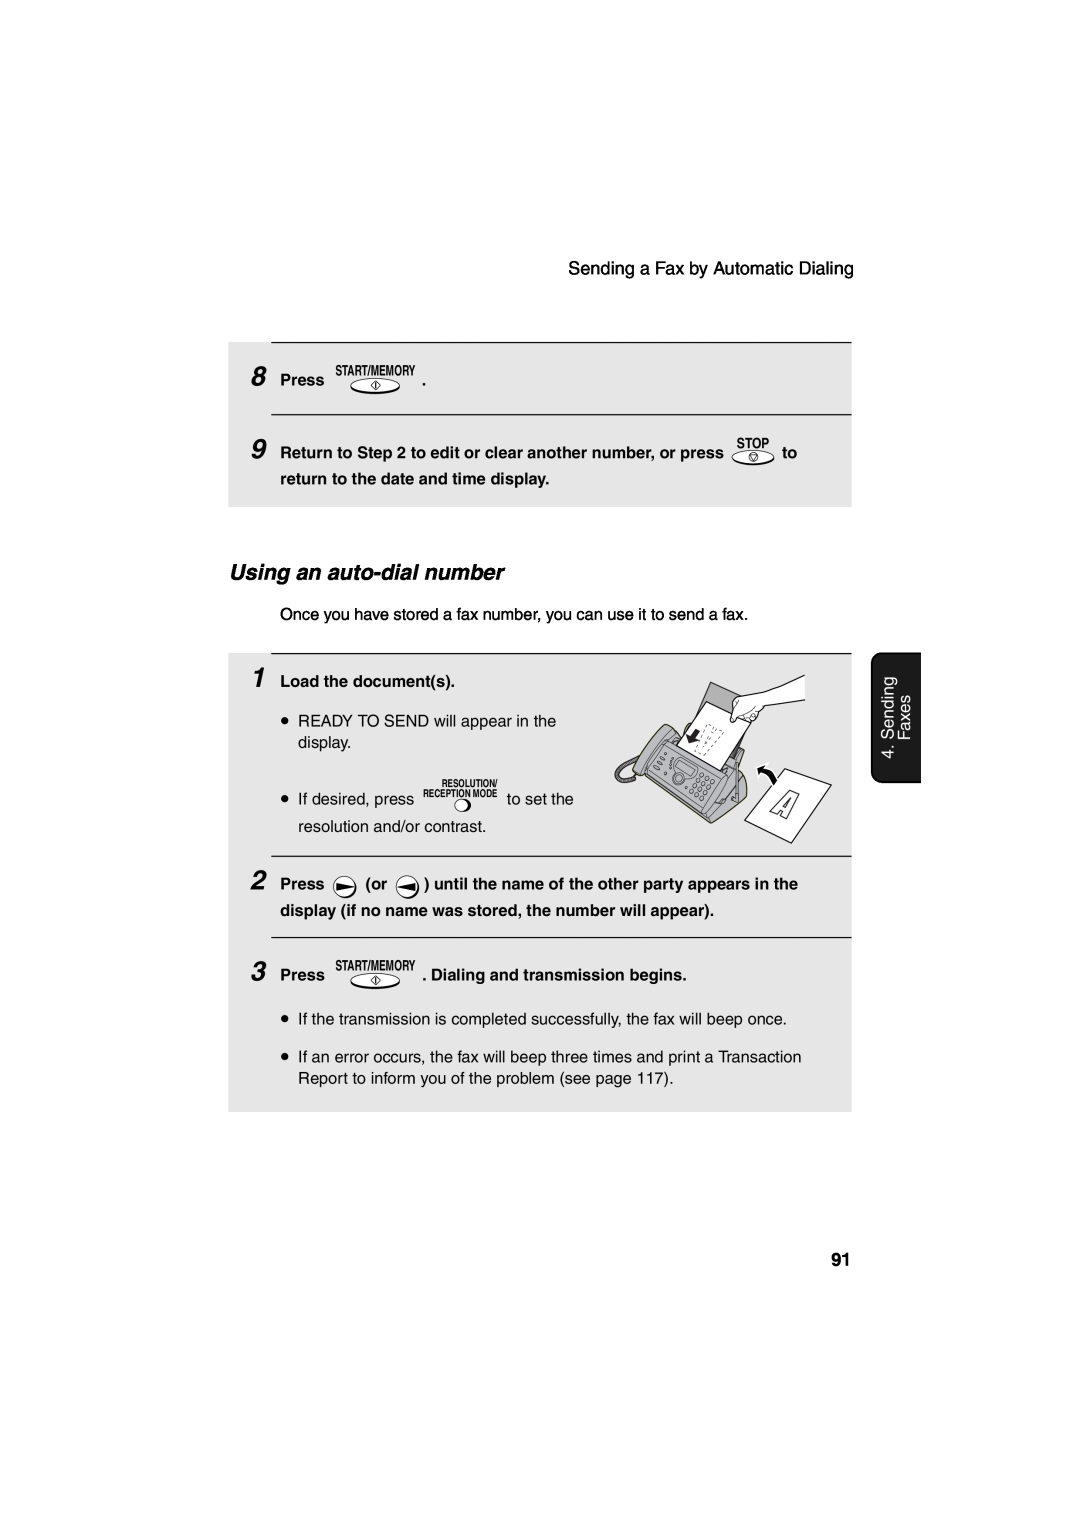 Sharp UX-CD600 operation manual Using an auto-dial number, Sending a Fax by Automatic Dialing, Faxes 